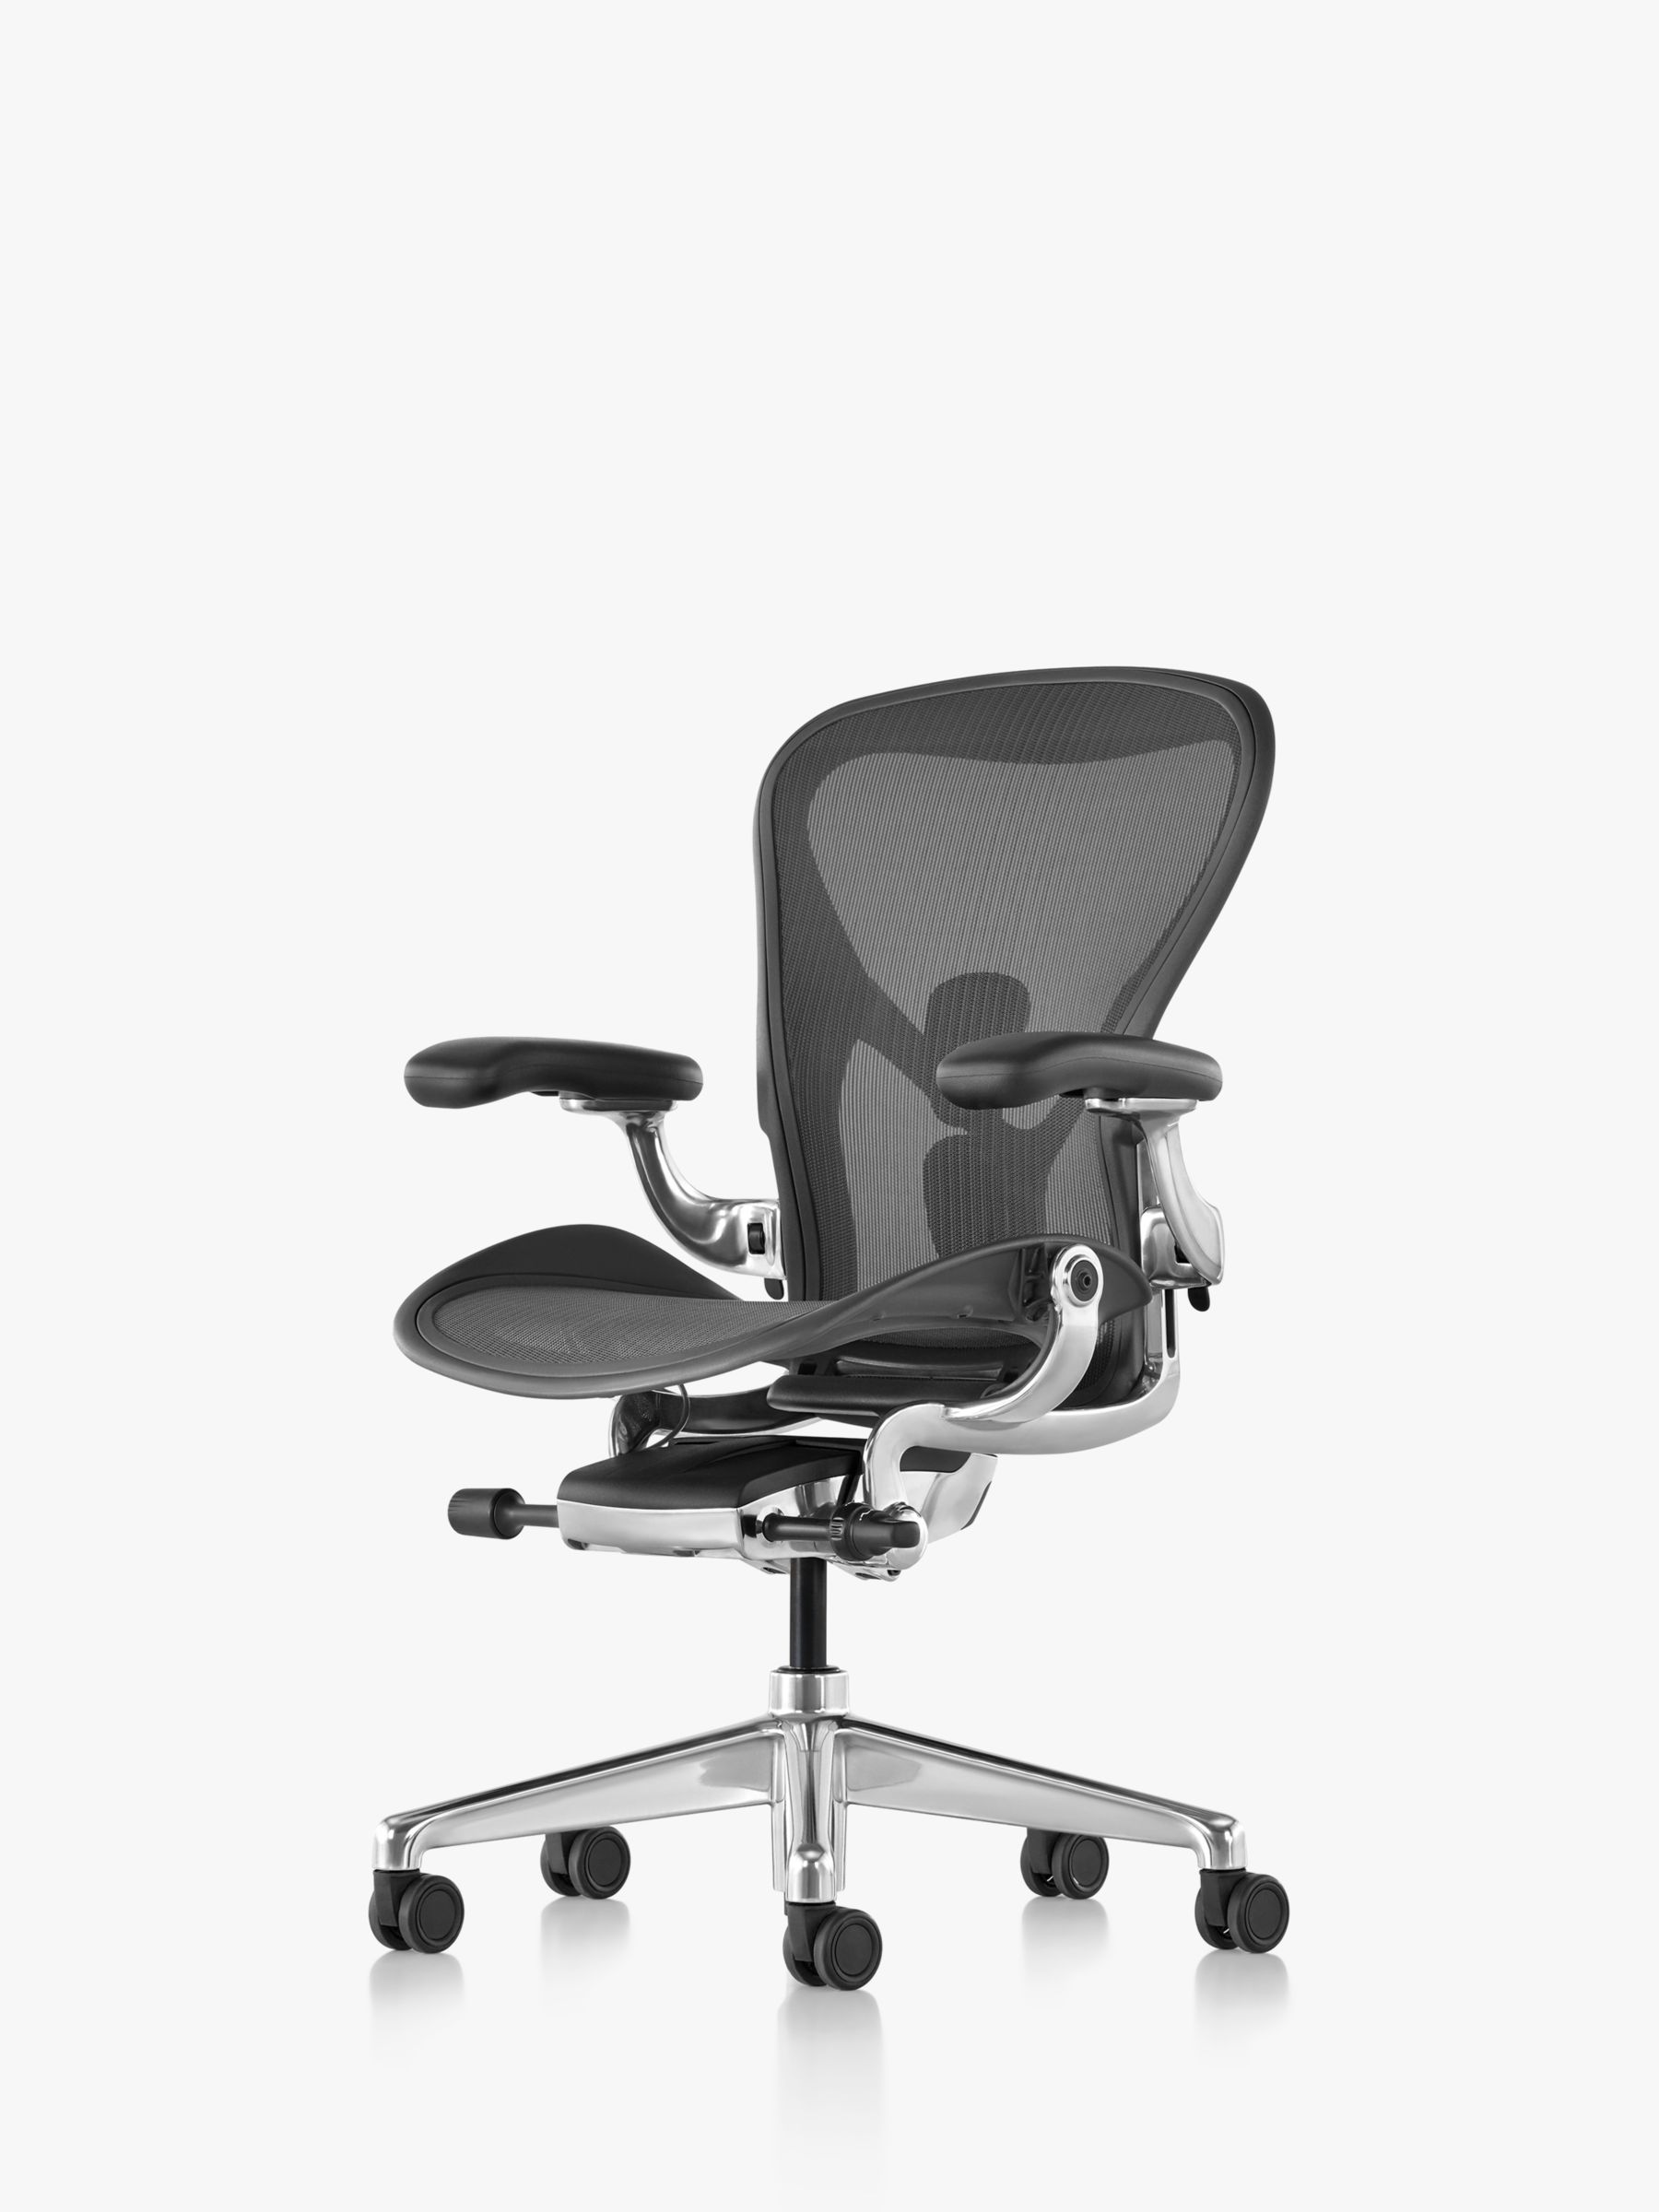 Miller Aeron Office Size A, Graphite/Polished